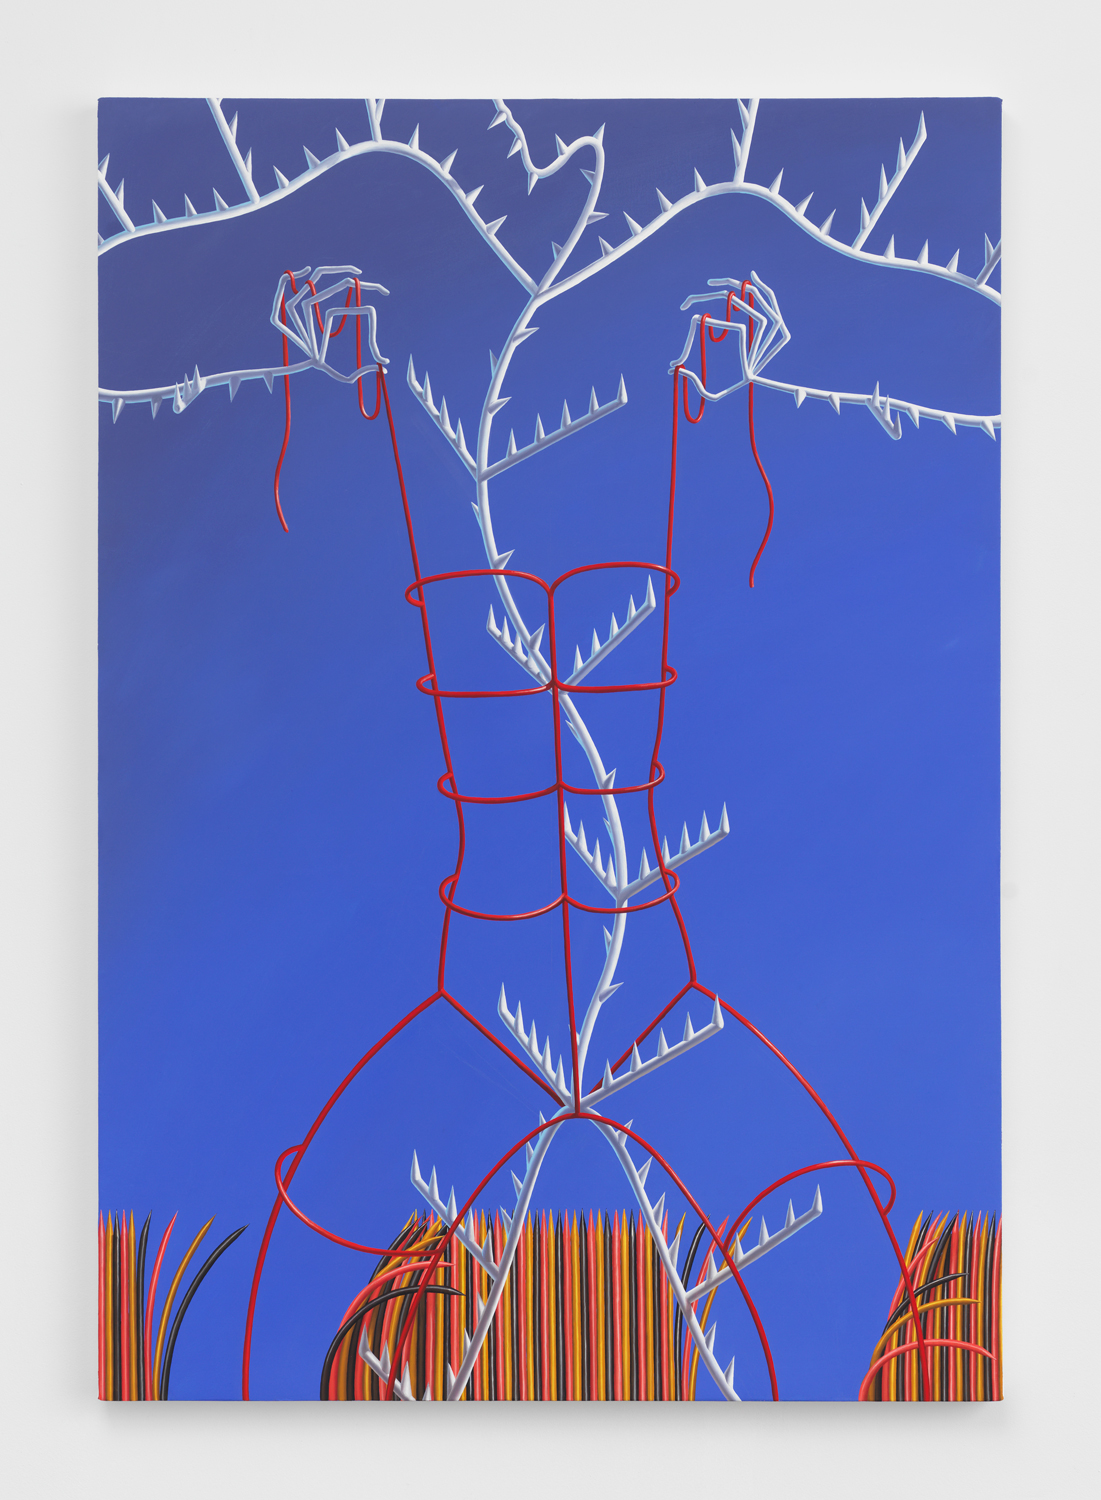 Sascha Braunig, The Fitting, 2020, Oil on linen over panel, 52h x 36w in.